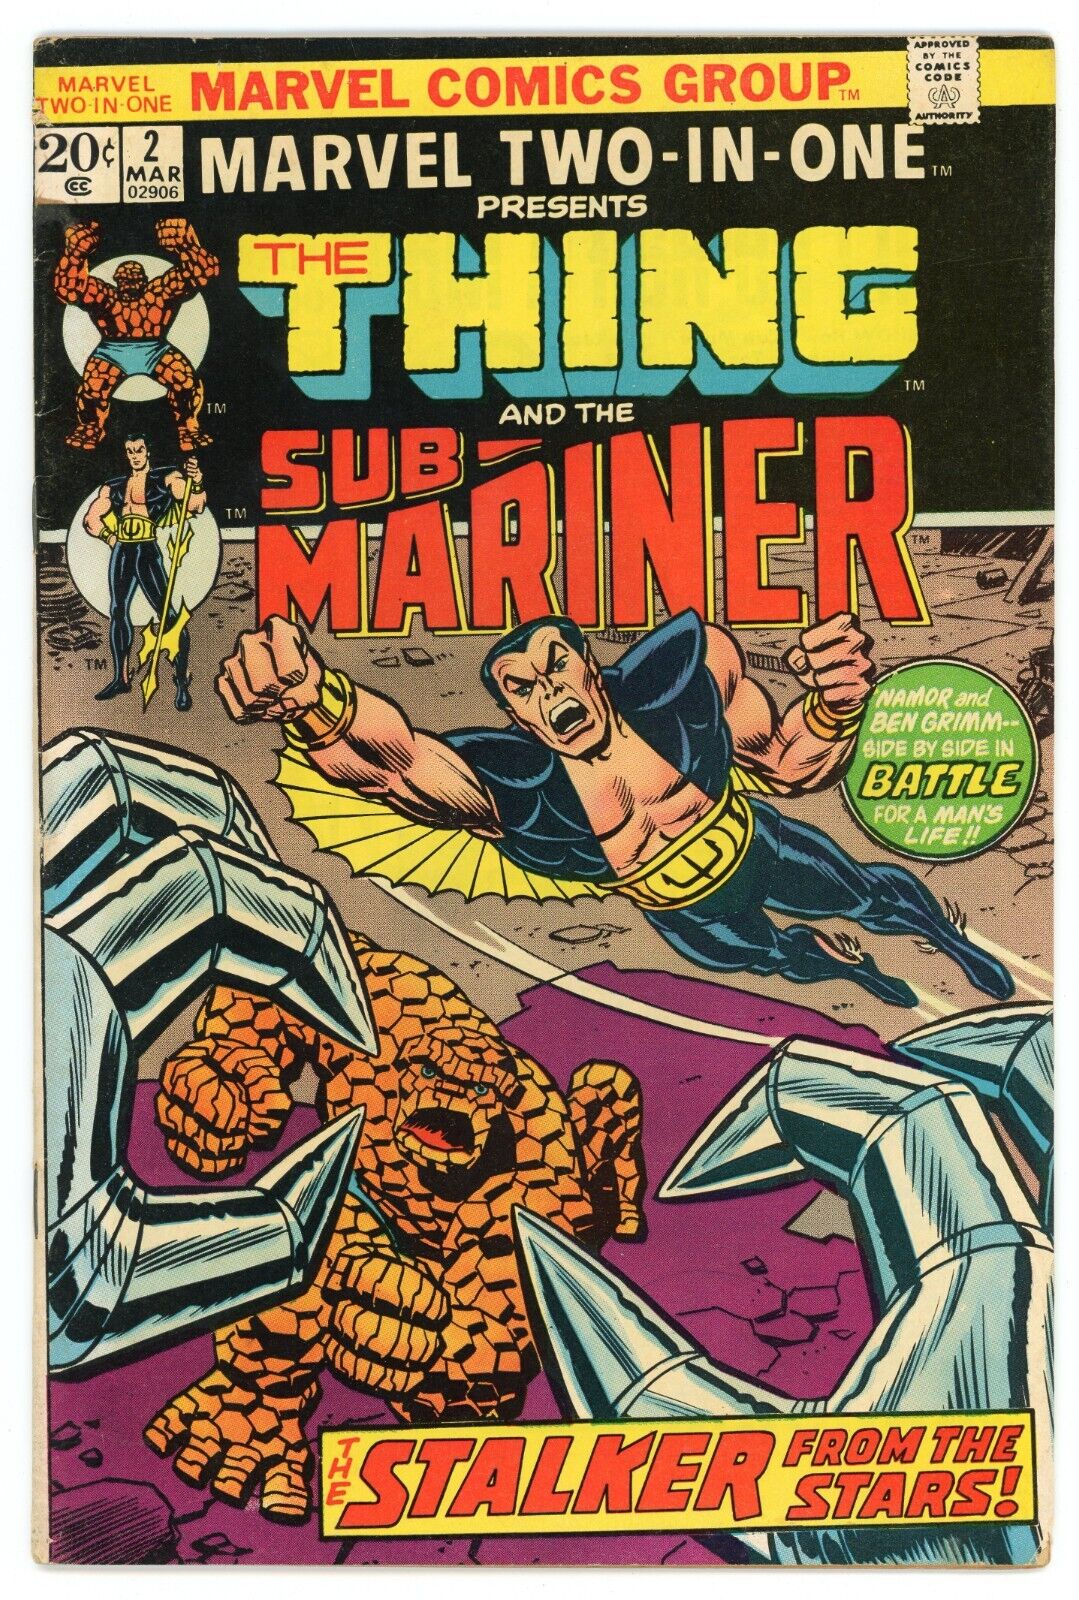 Marvel Two-in-One #2 The Thing and the Sub-Mariner Marvel Comics 1973